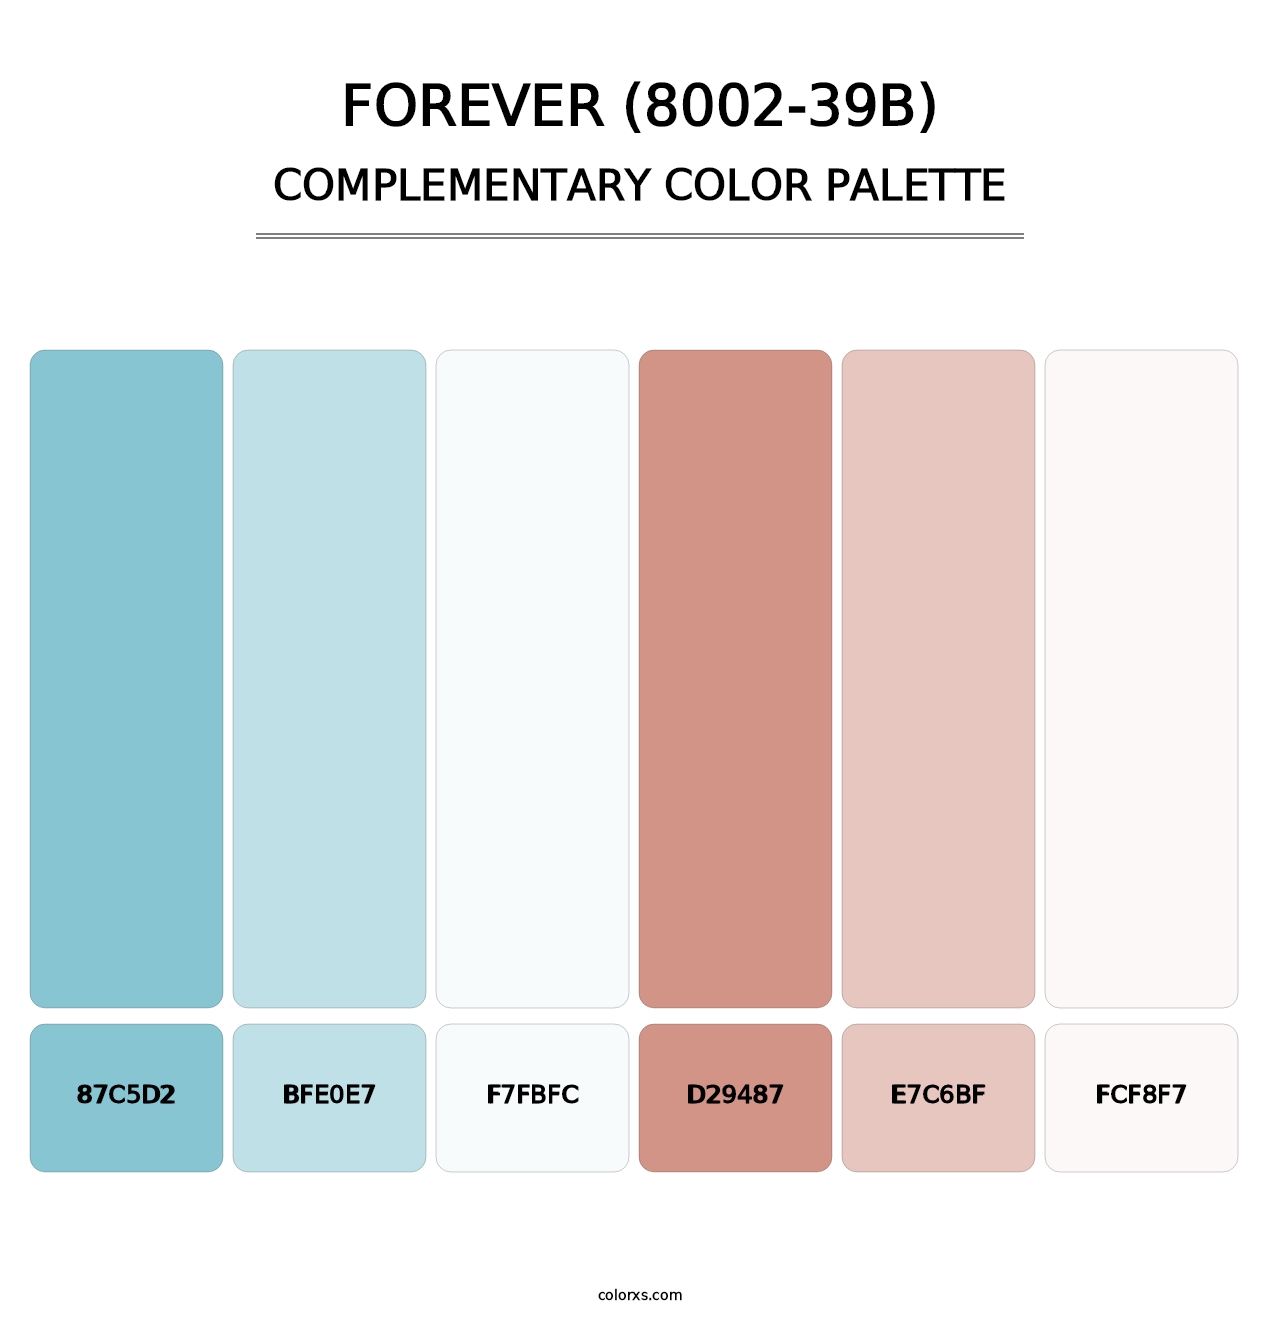 Forever (8002-39B) - Complementary Color Palette